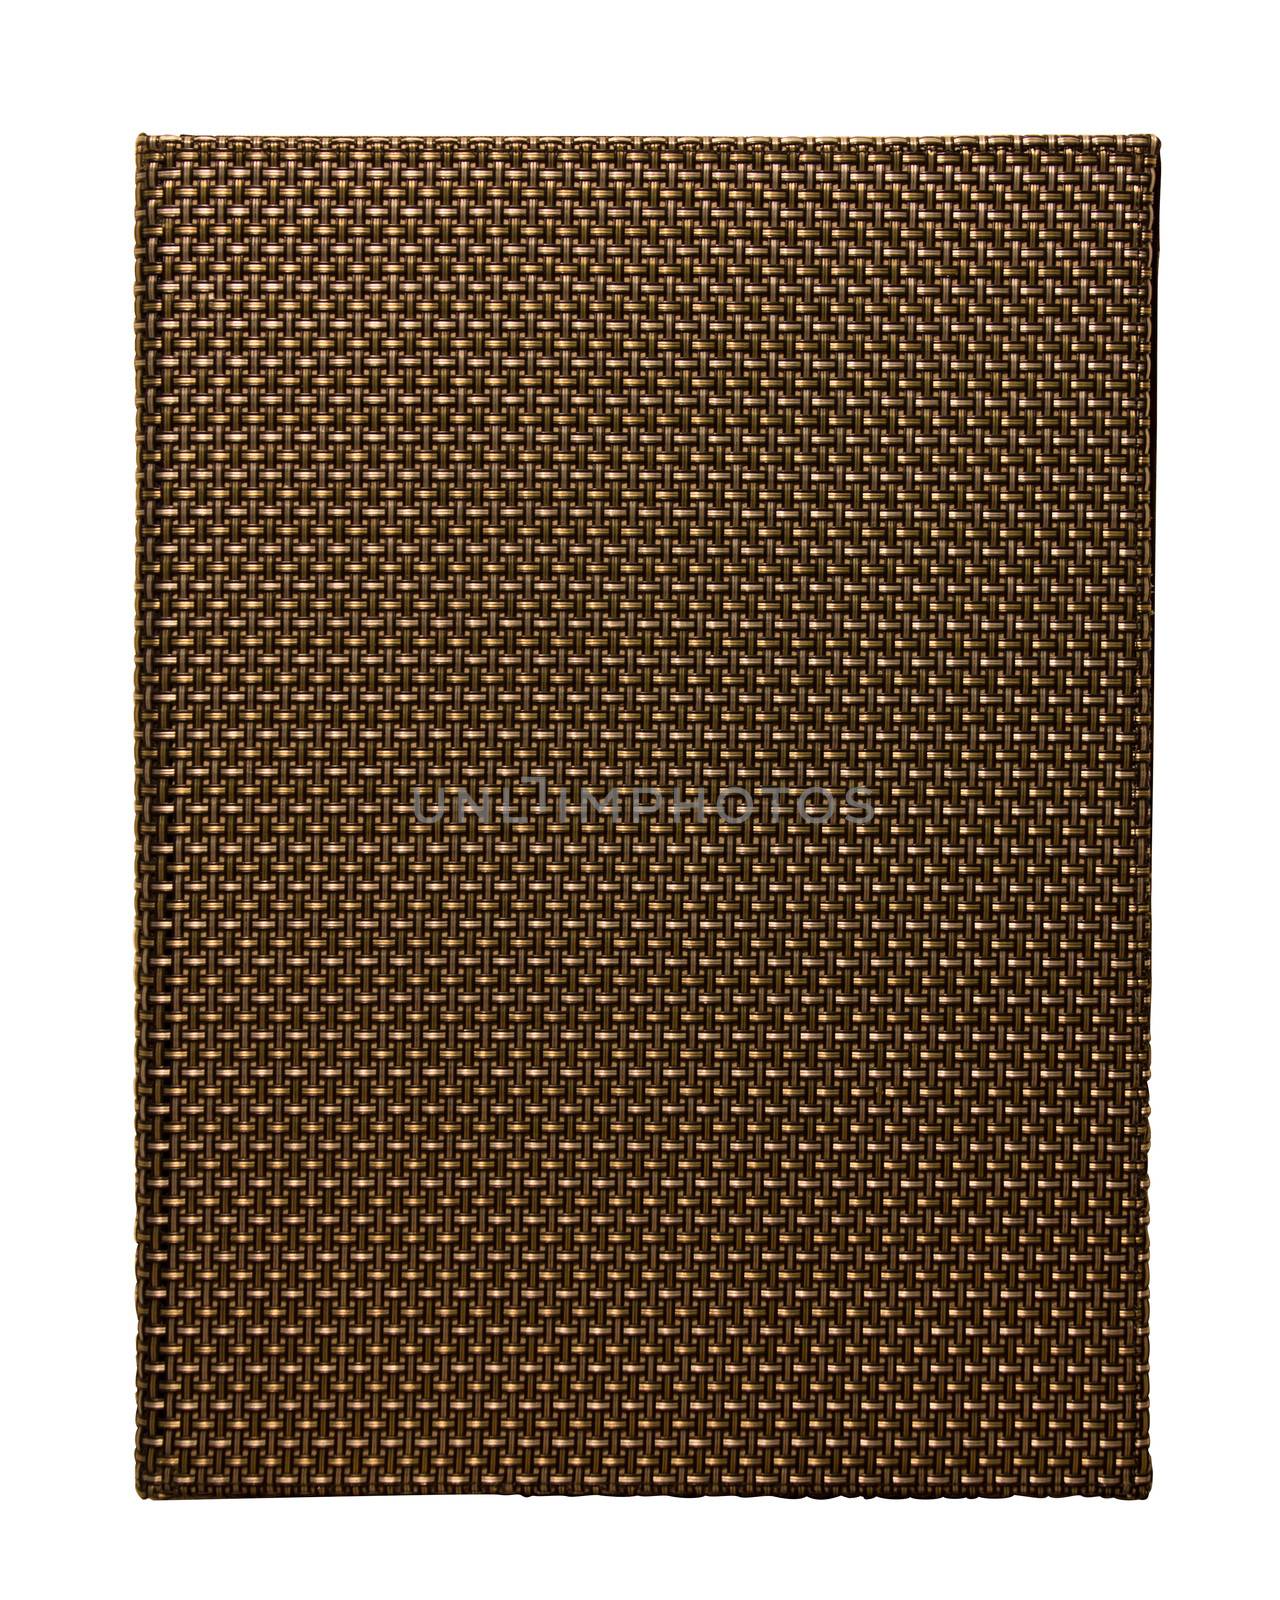 Gold Weaving file folder.Isolate on a white background